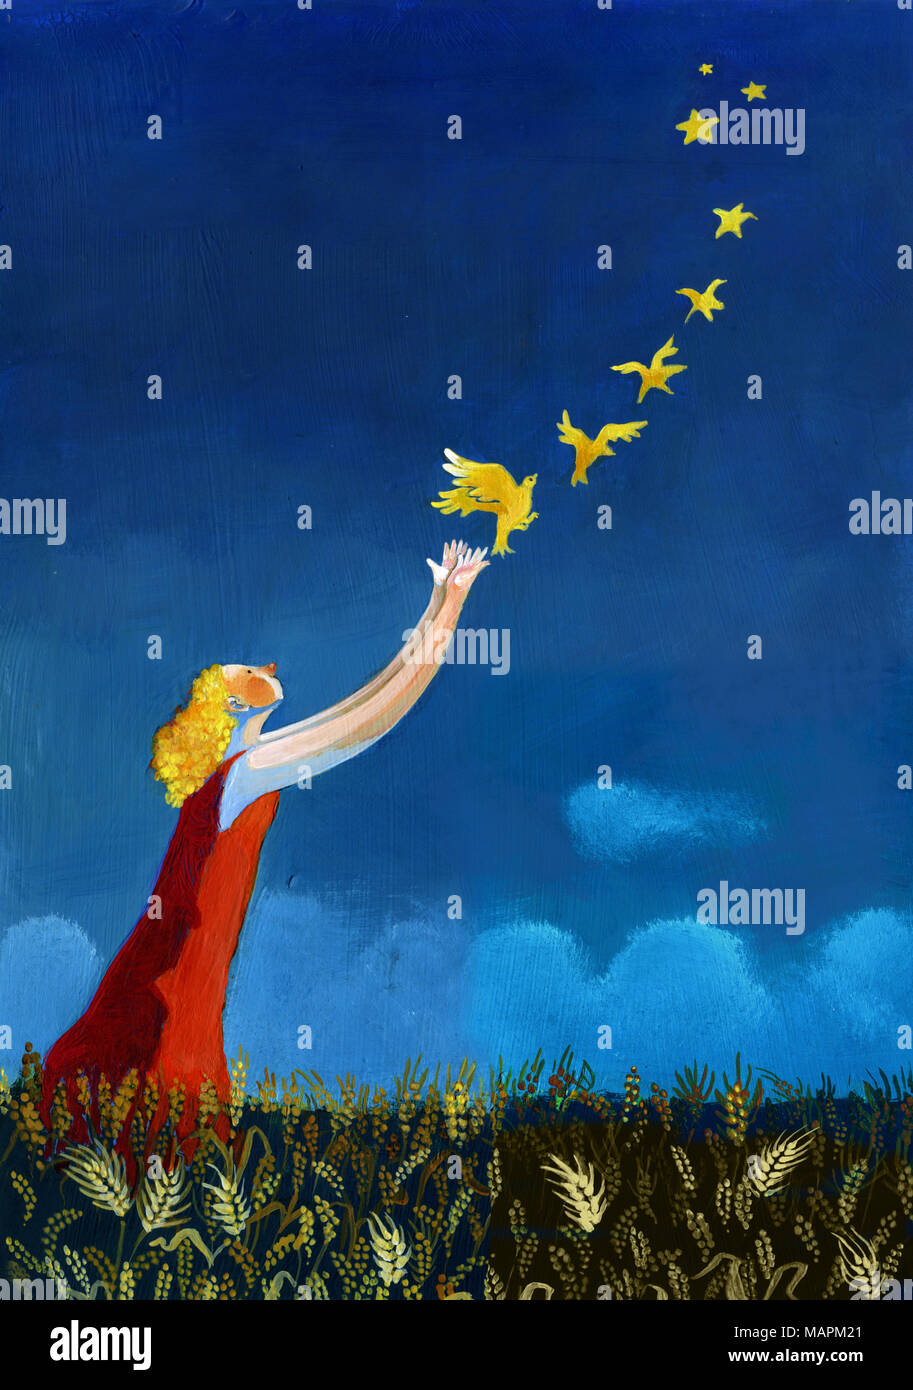 surreal girl creating stars throwing flying canaries Stock Photo